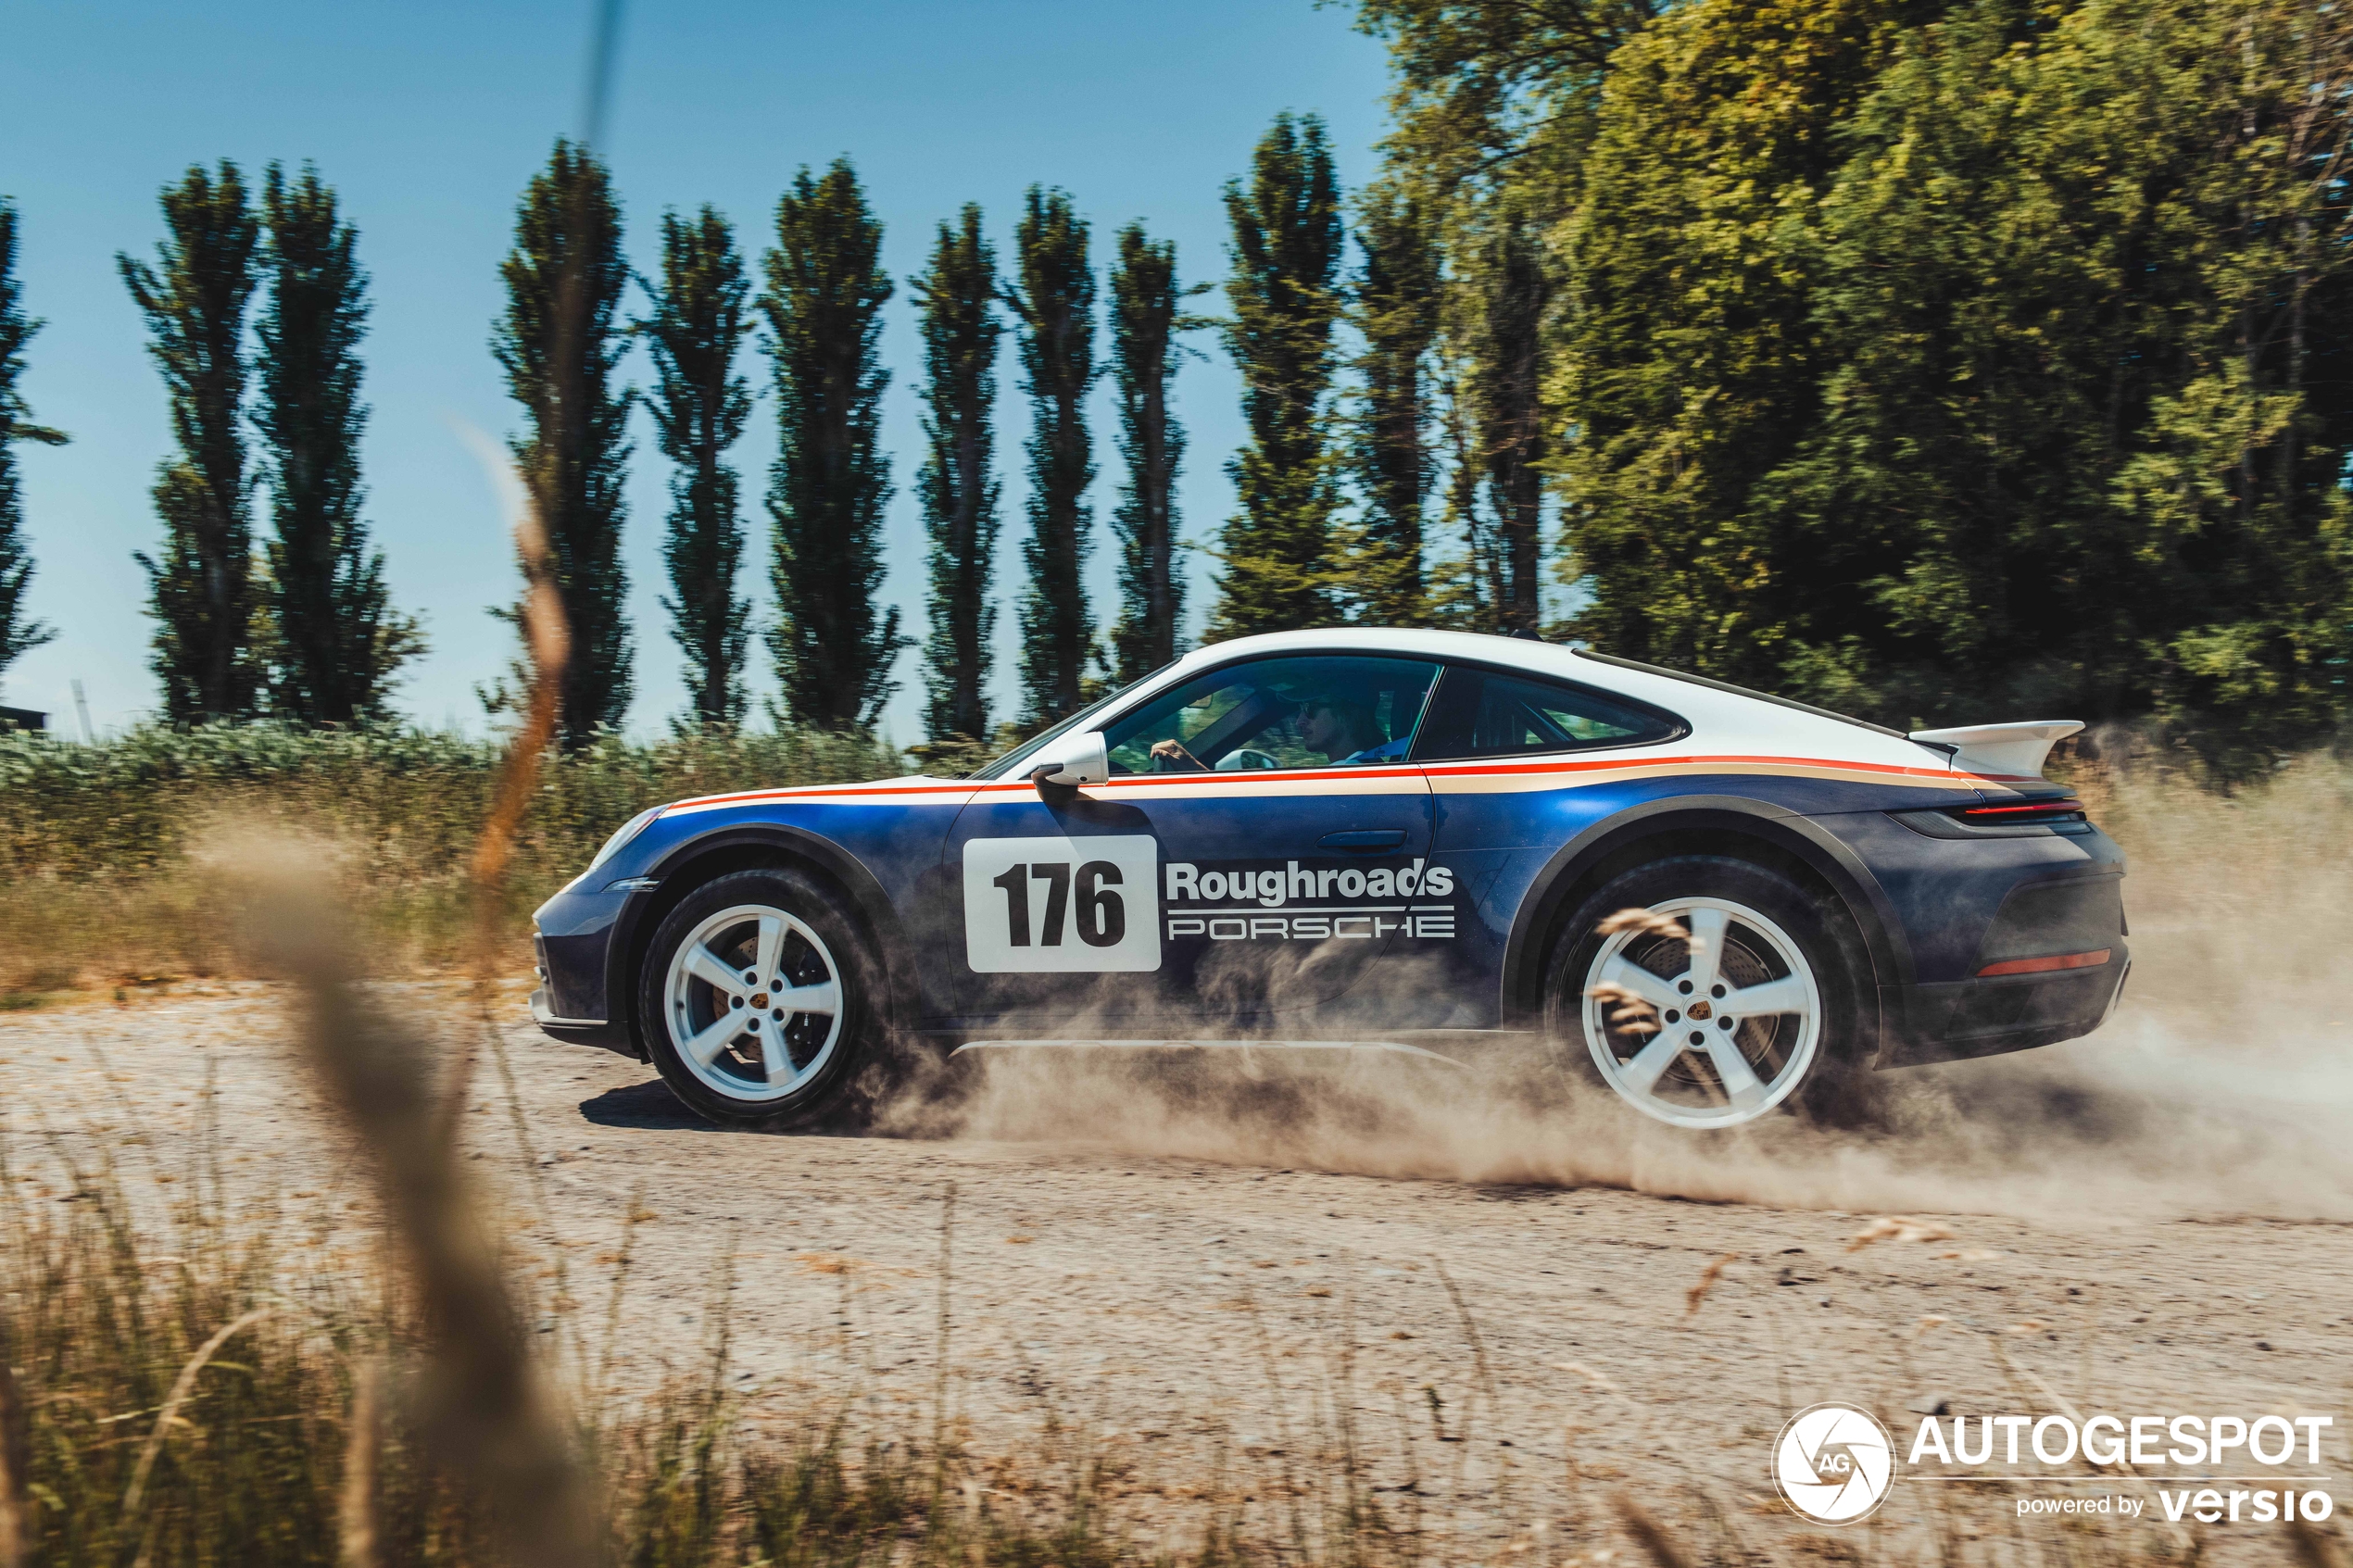 A 911 Dakar was spotted in the wild